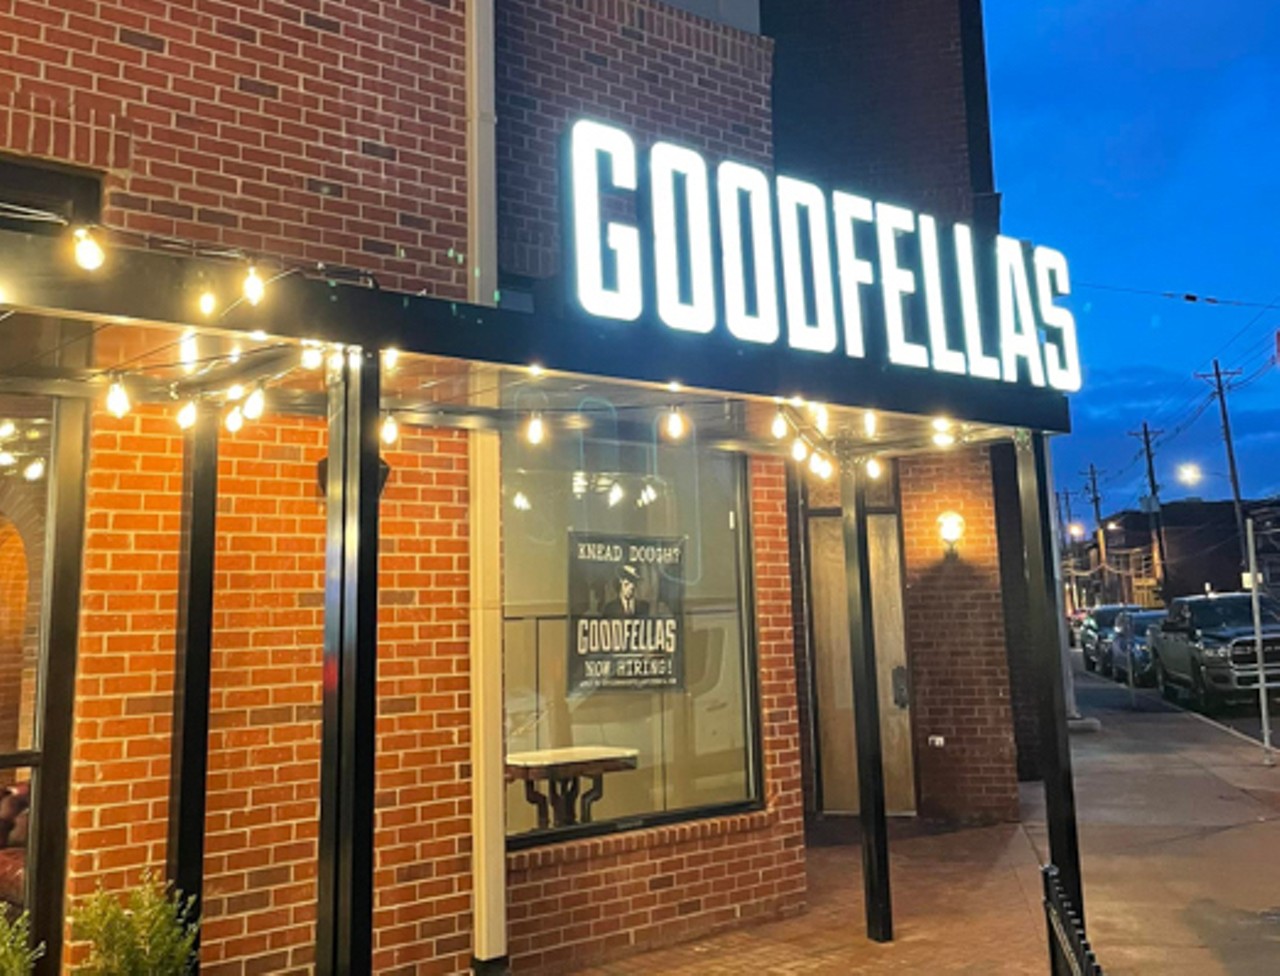 Goodfellas Pizzeria
Opened in January 
642 Baxter Ave.
This Lexington-based pizza chain has been trying to break into the Louisville market for over a decade. After some issues with finding a location, it finally opened this January in the new Baxter apartment complex. This New York-style joint fit for a Soprano also serves craft cocktails.
Photo via facebook.com/GoodfellasBaxter